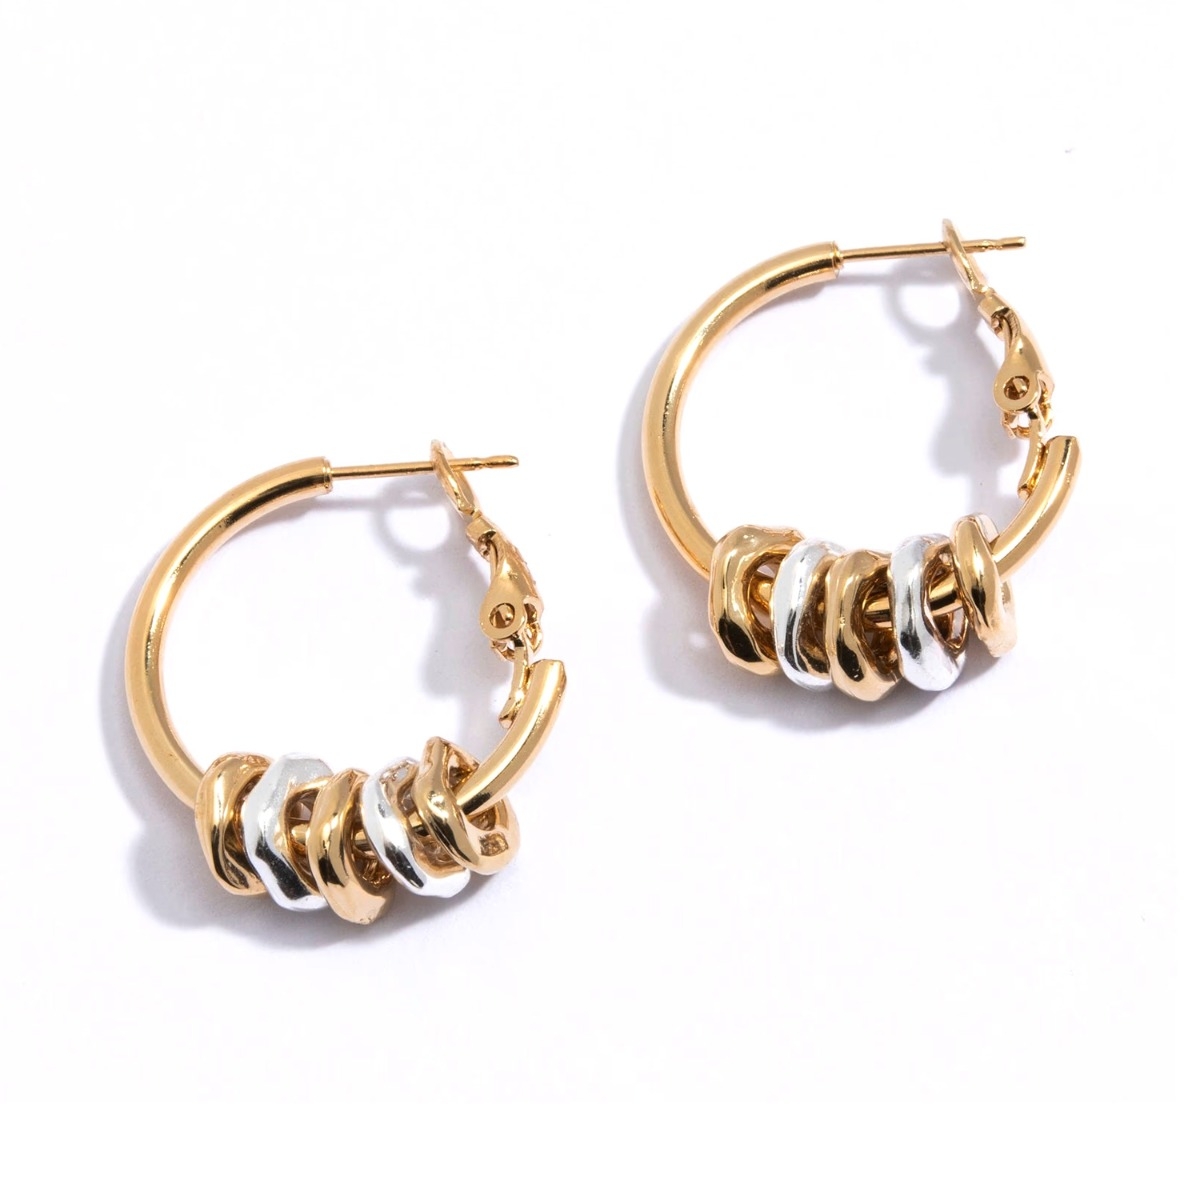 Danon 24K Gold and Silver Plated Five Rings Earrings - Color Option - 1